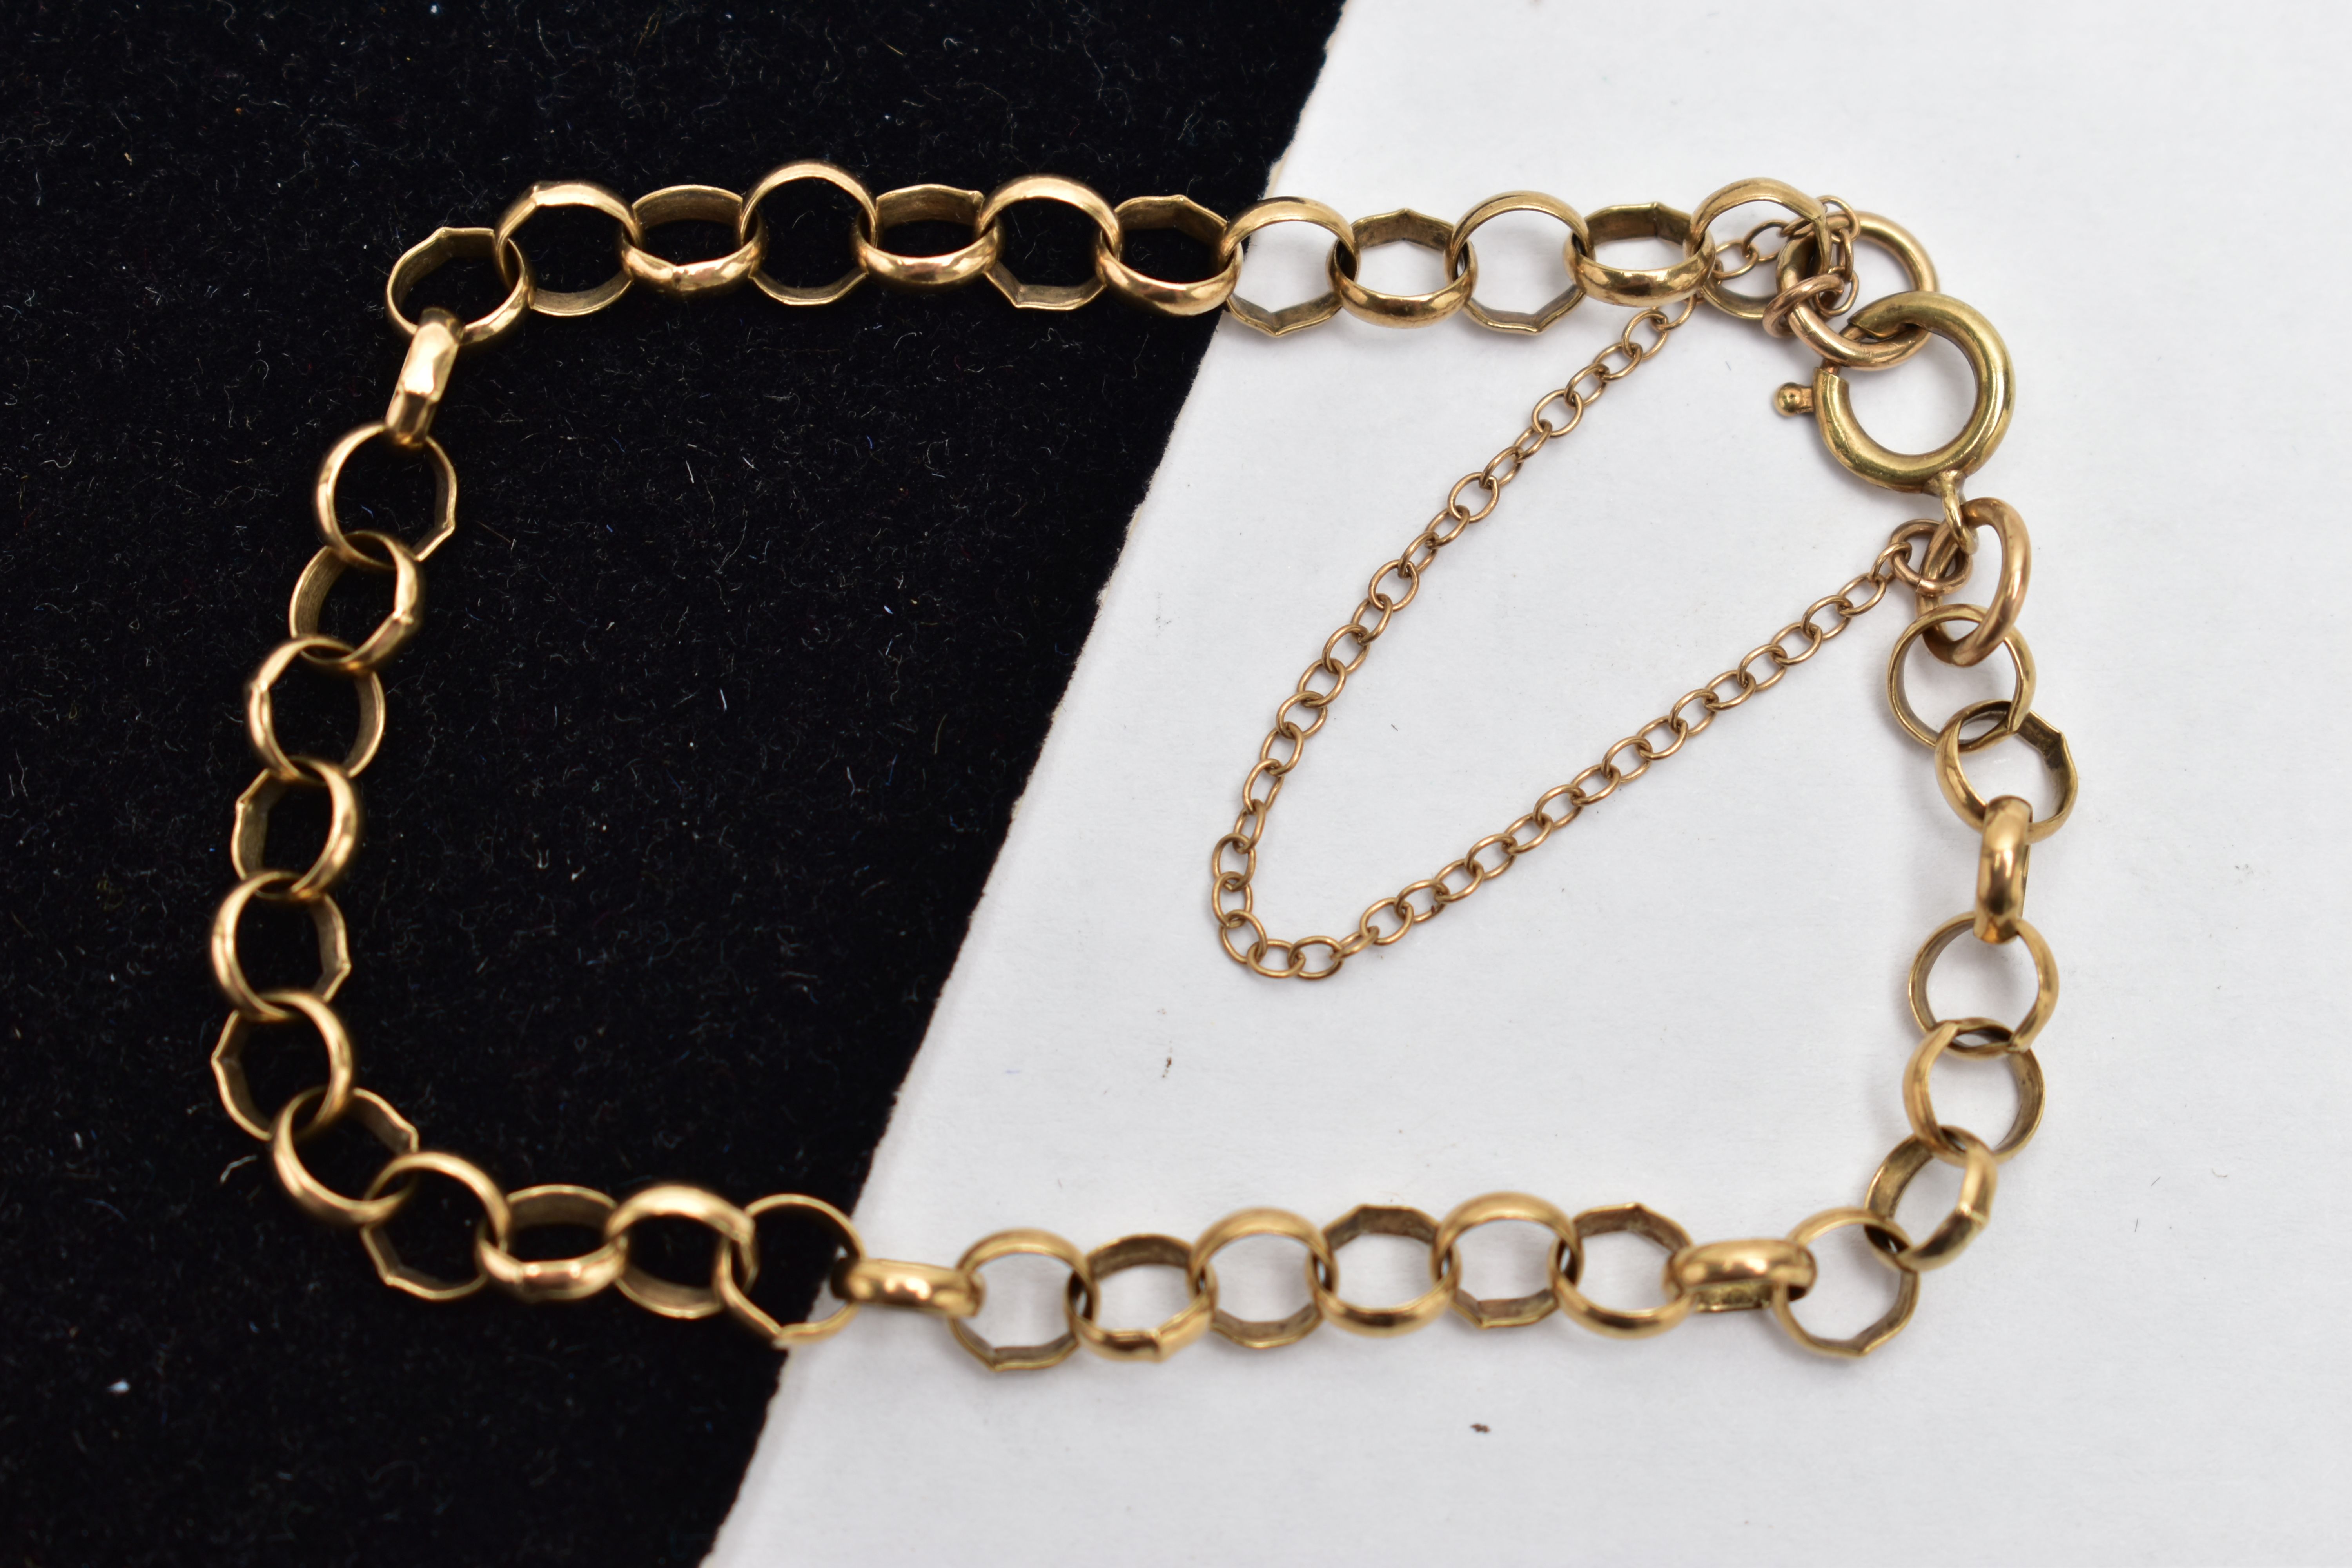 A YELLOW METAL BRACELET, comprising a series of belcher links, with lobster clasp and safety